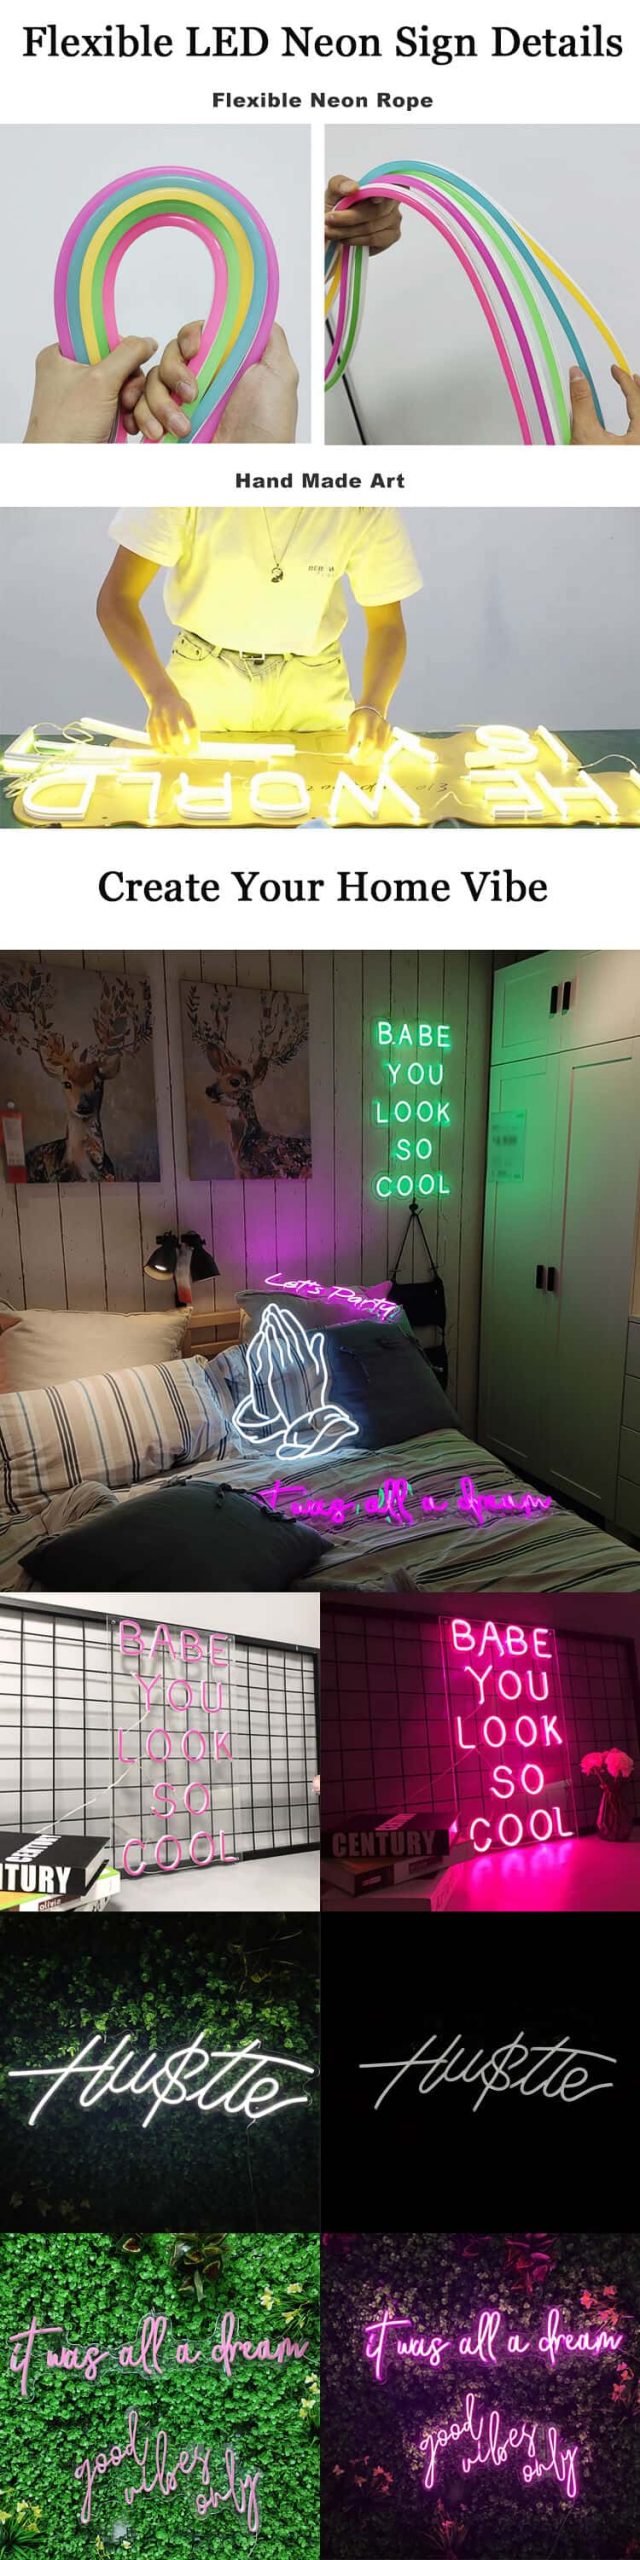 Flexible LED Neon Sign Product Details